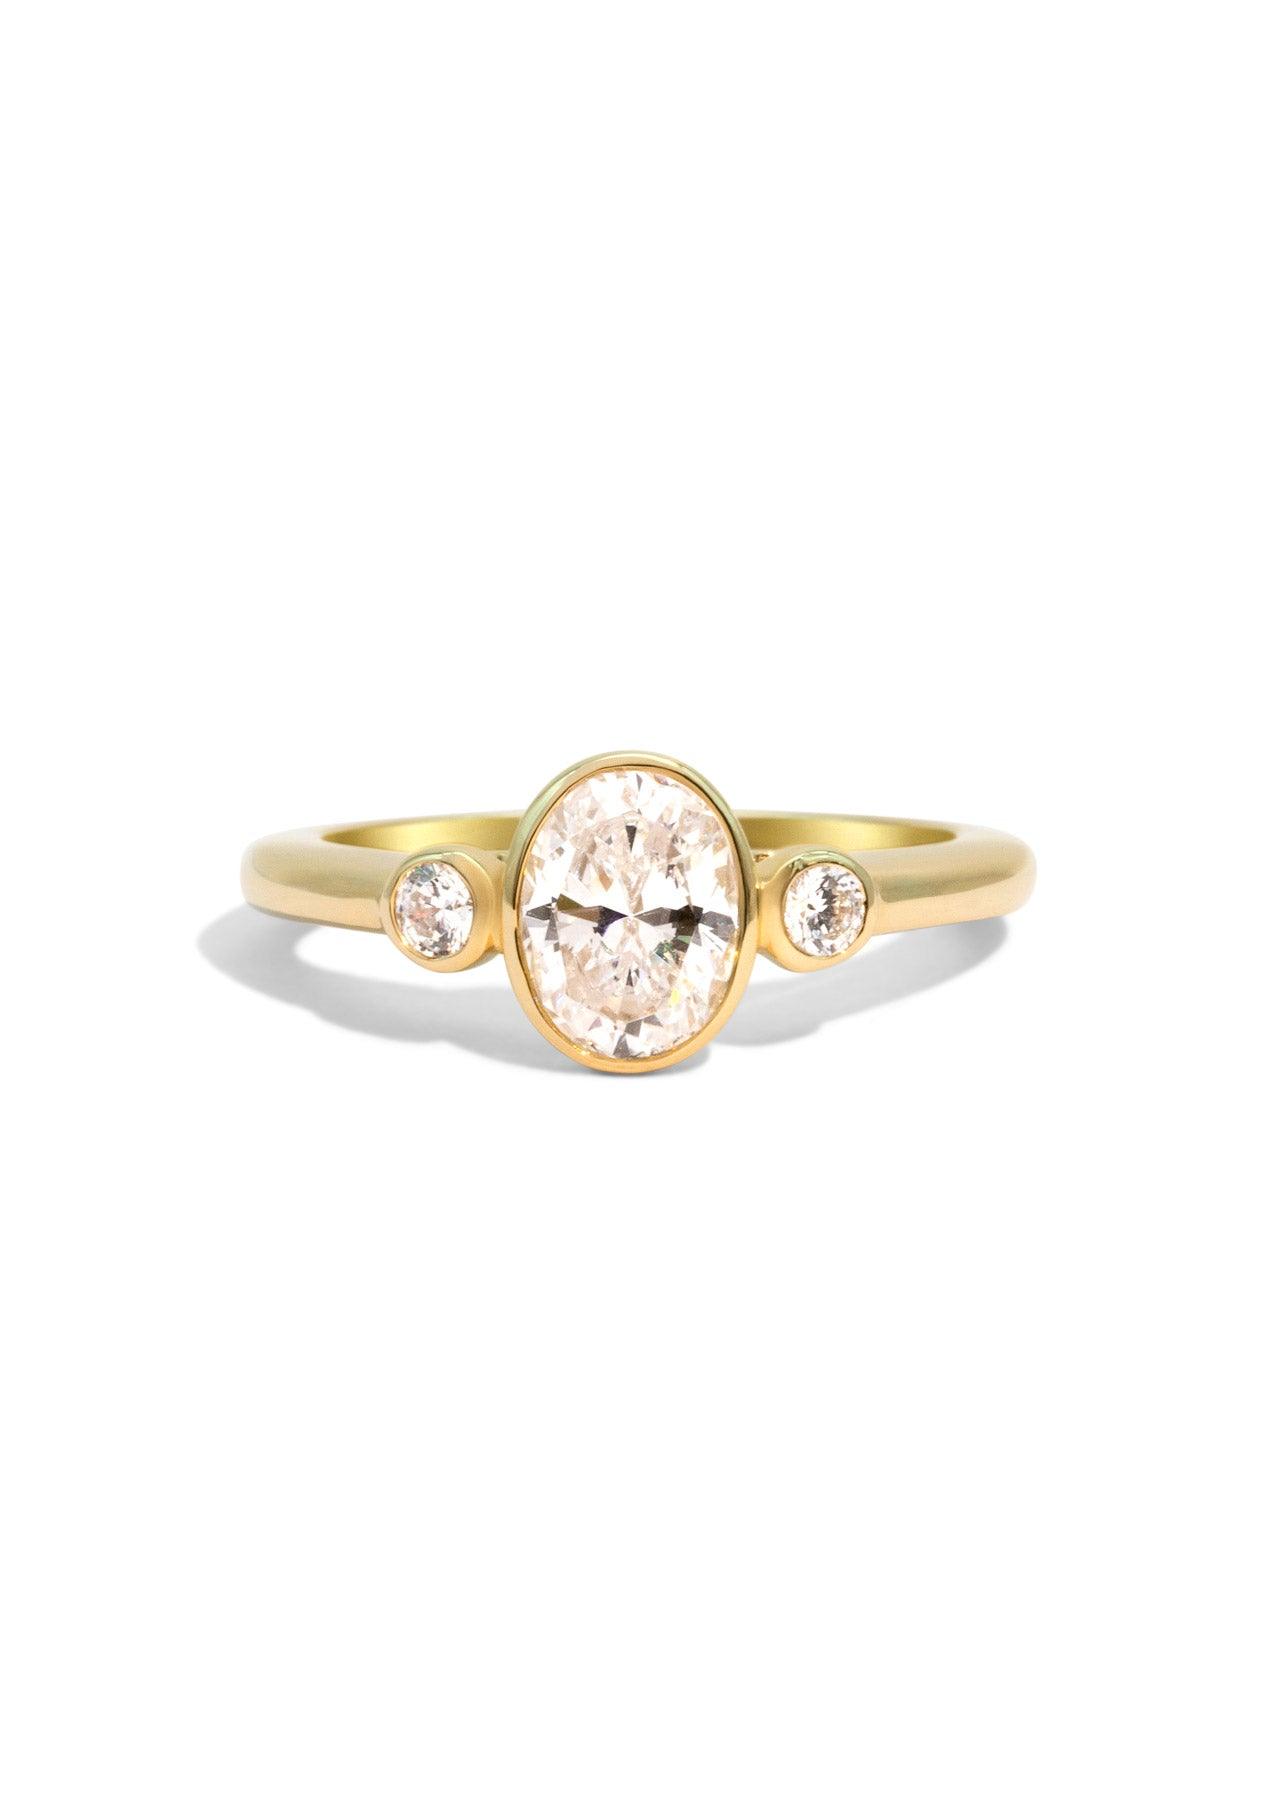 The Beatrice Yellow Gold Cultured Diamond Ring